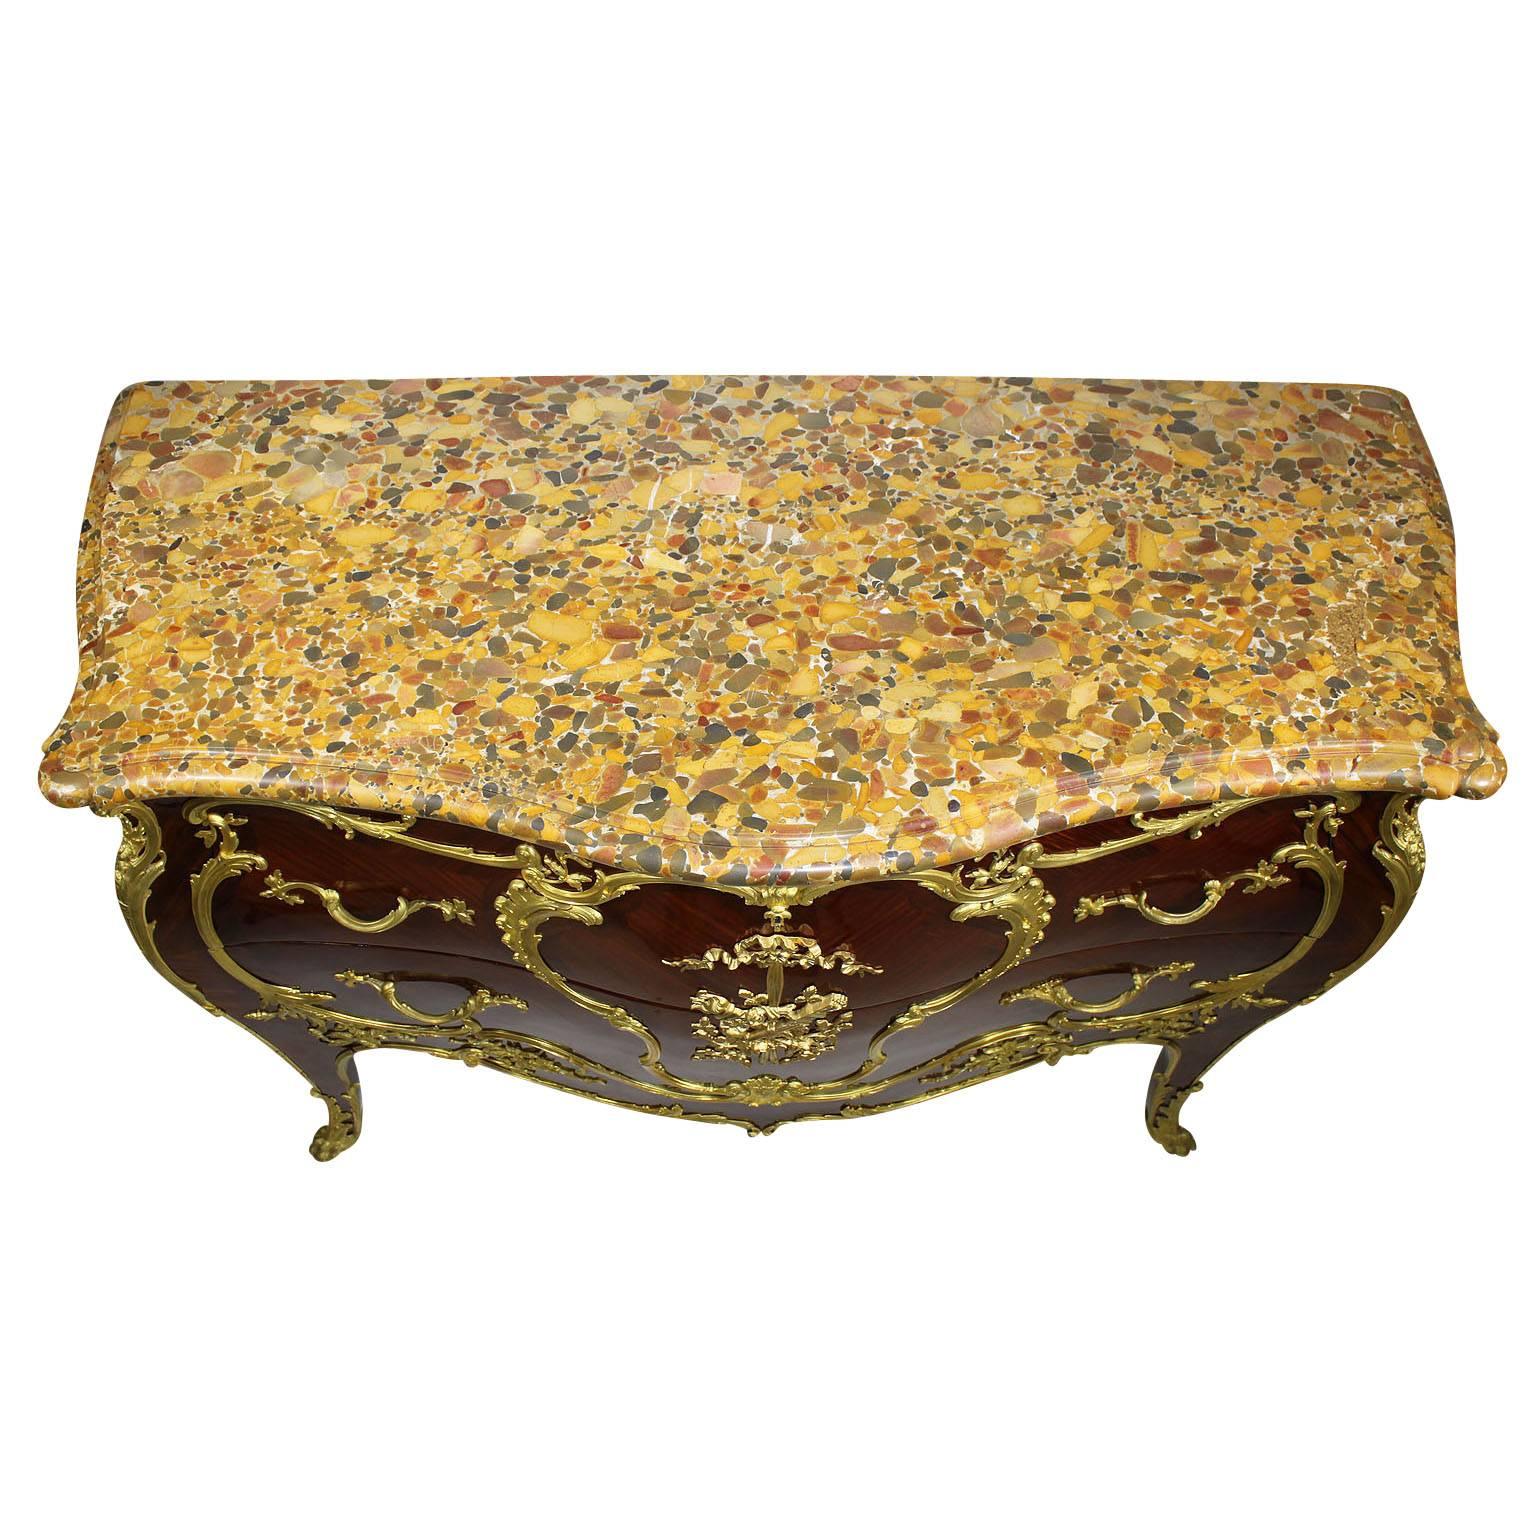 French 19th-20th Century Louis XV Style Ormolu-Mounted Commode For Sale 3